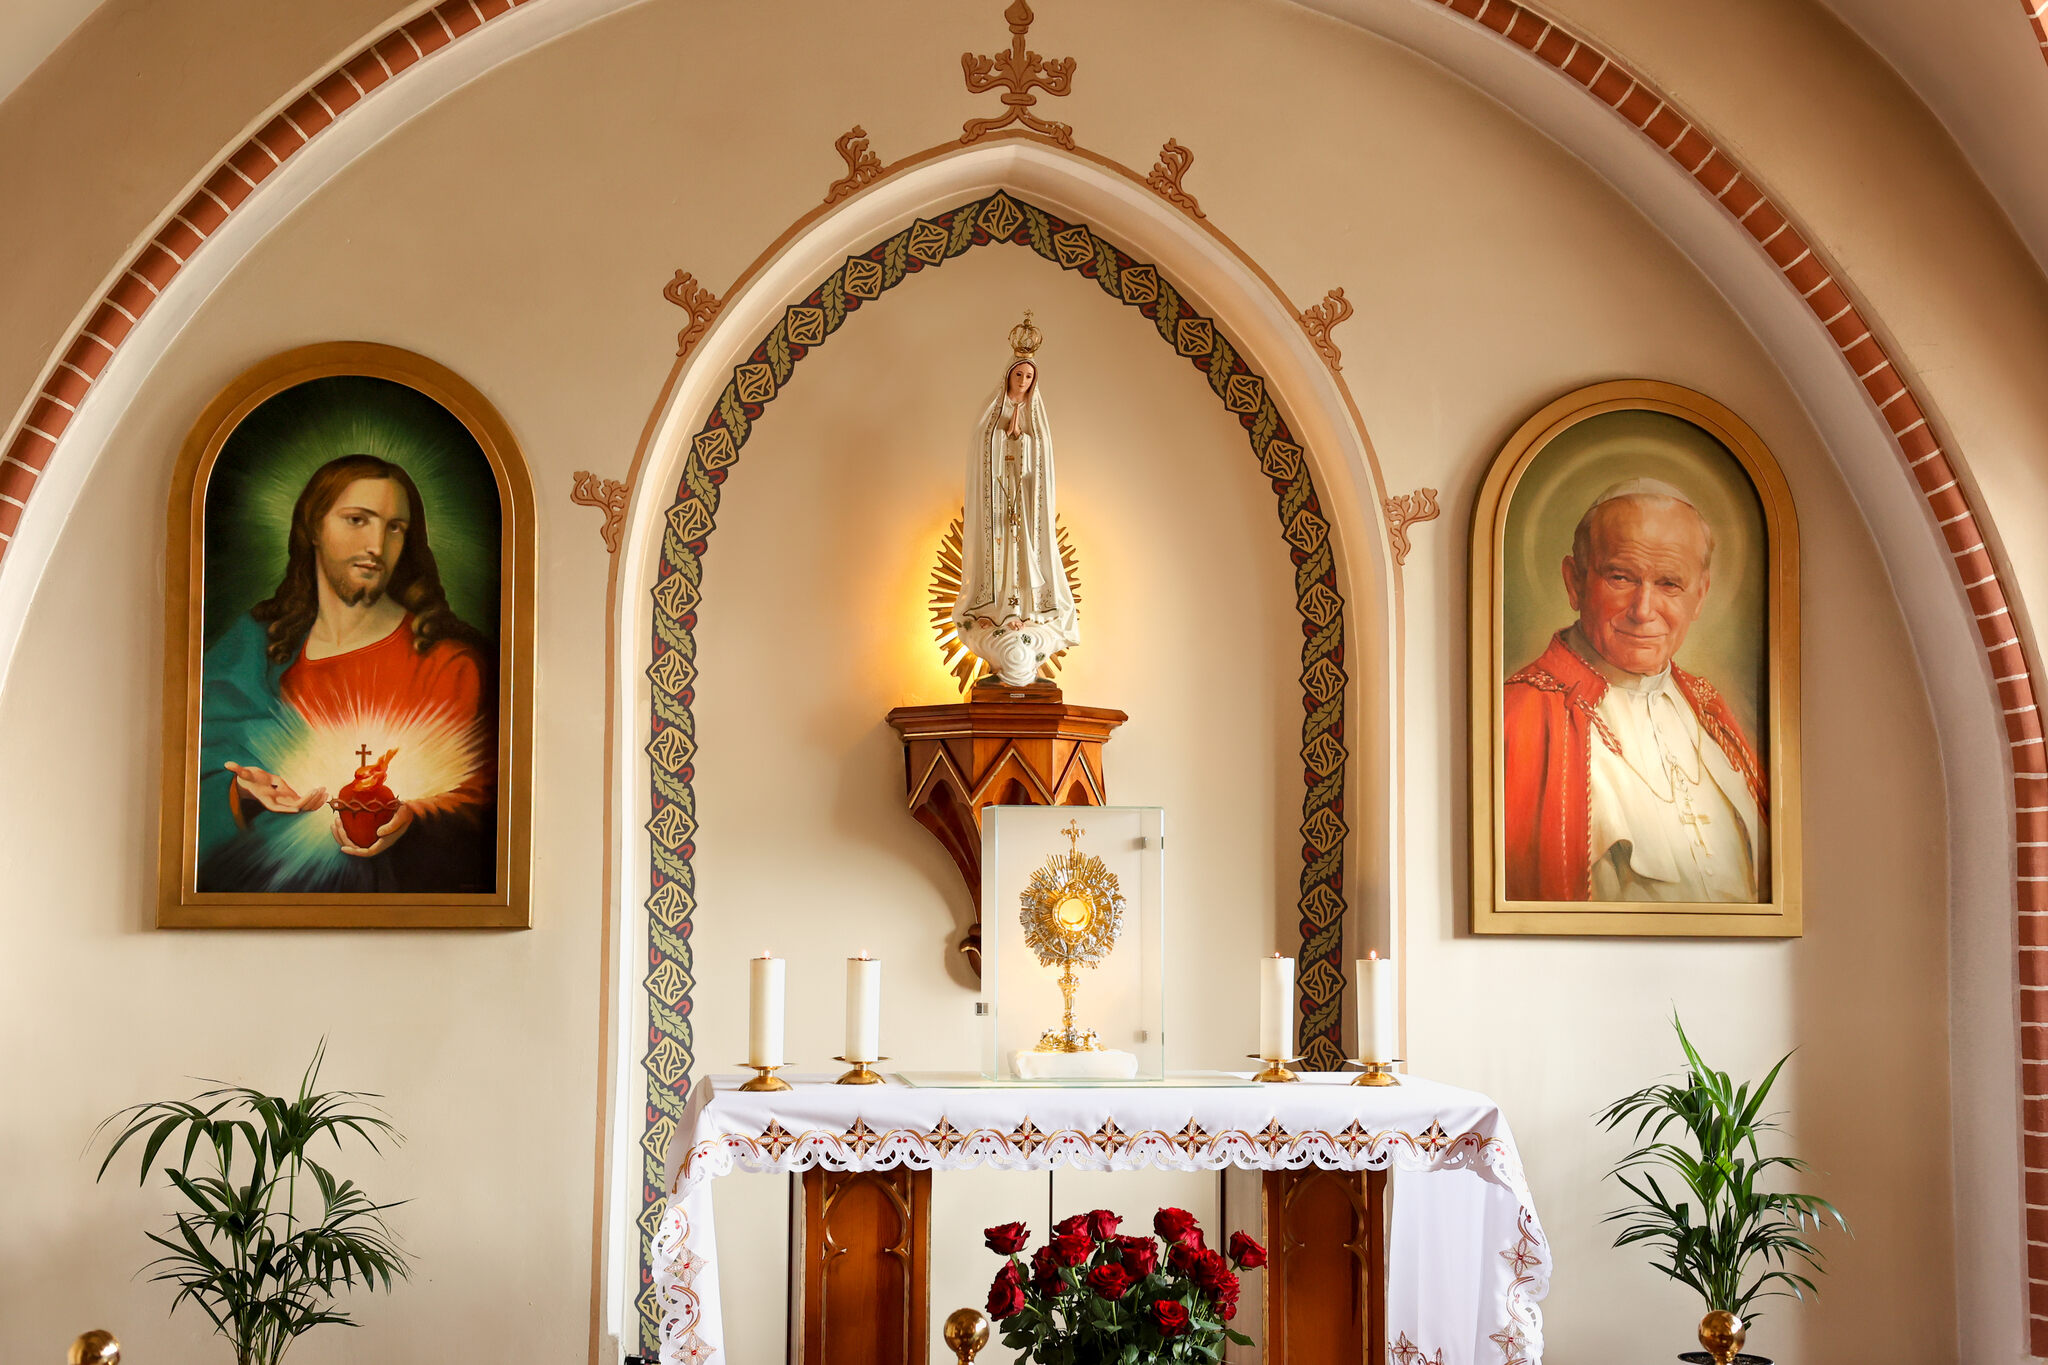 The most Holy Sacrament exposed in the adoration chapel